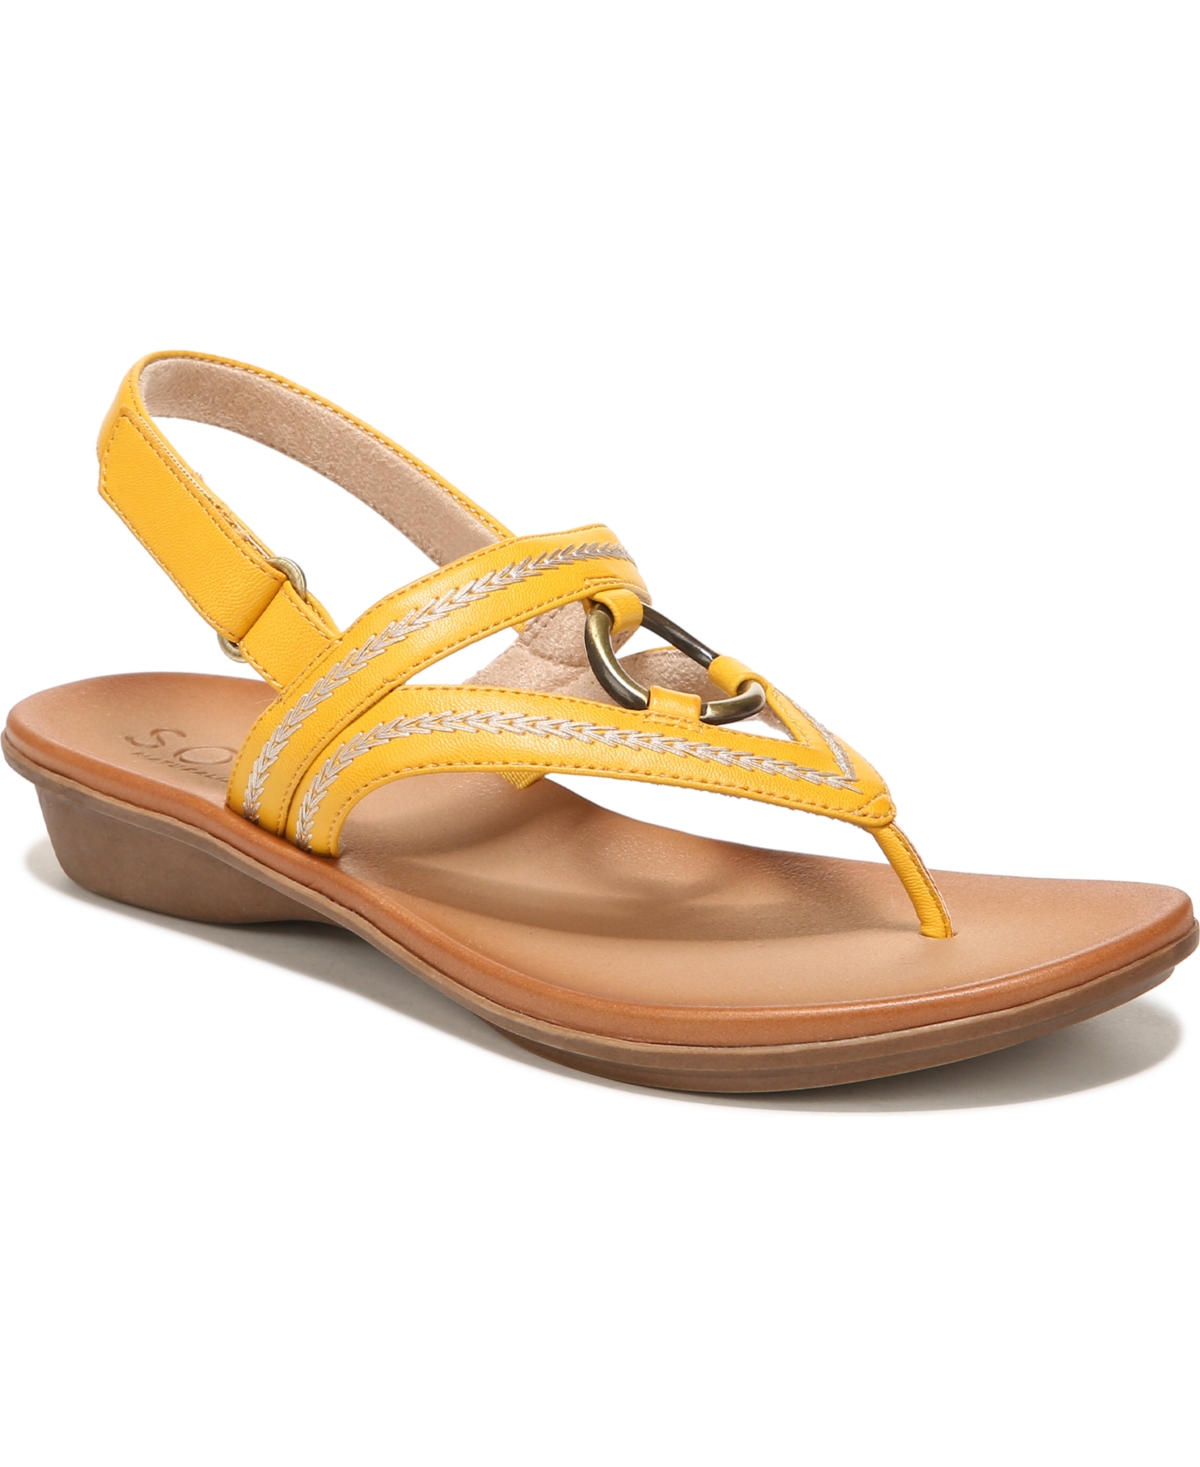 Soul Naturalizer Sunny Flat Sandals Women's Shoes In Sunshine Yellow Faux Leather